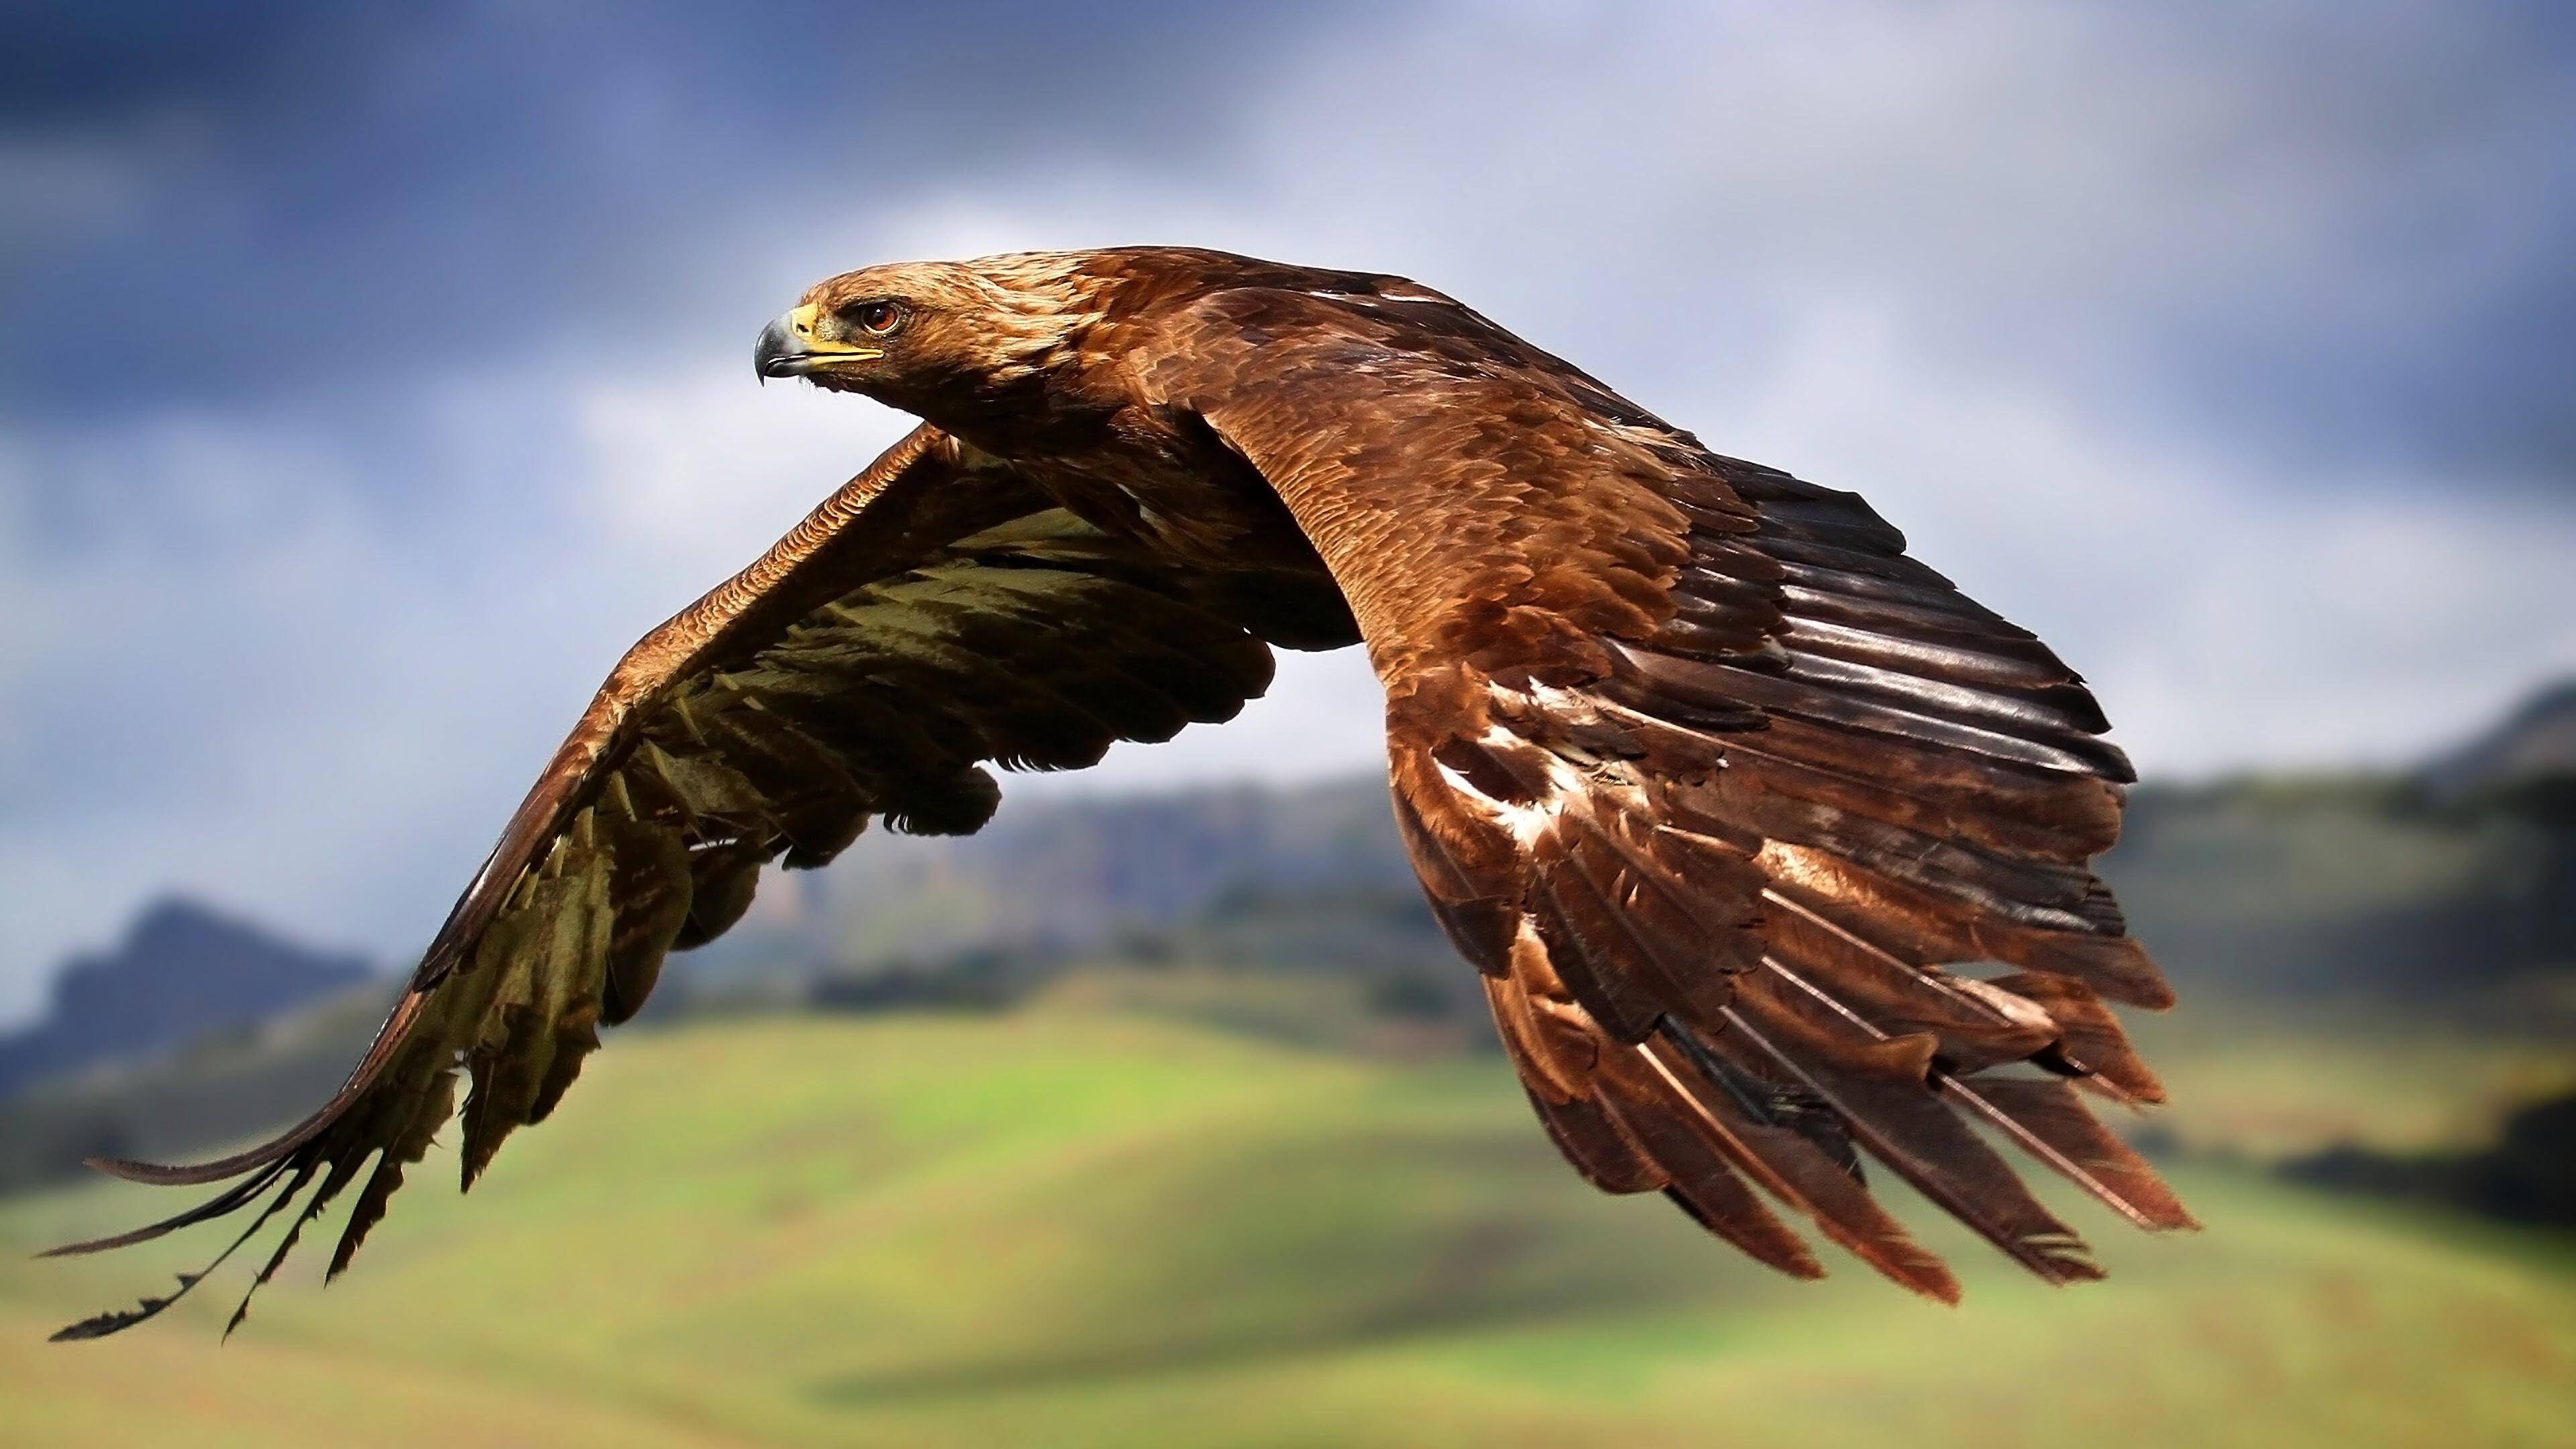 Golden Eagle: Hawk in flight, Birds of prey of the family Accipitridae, Dark brown wings. 3840x2160 4K Background.